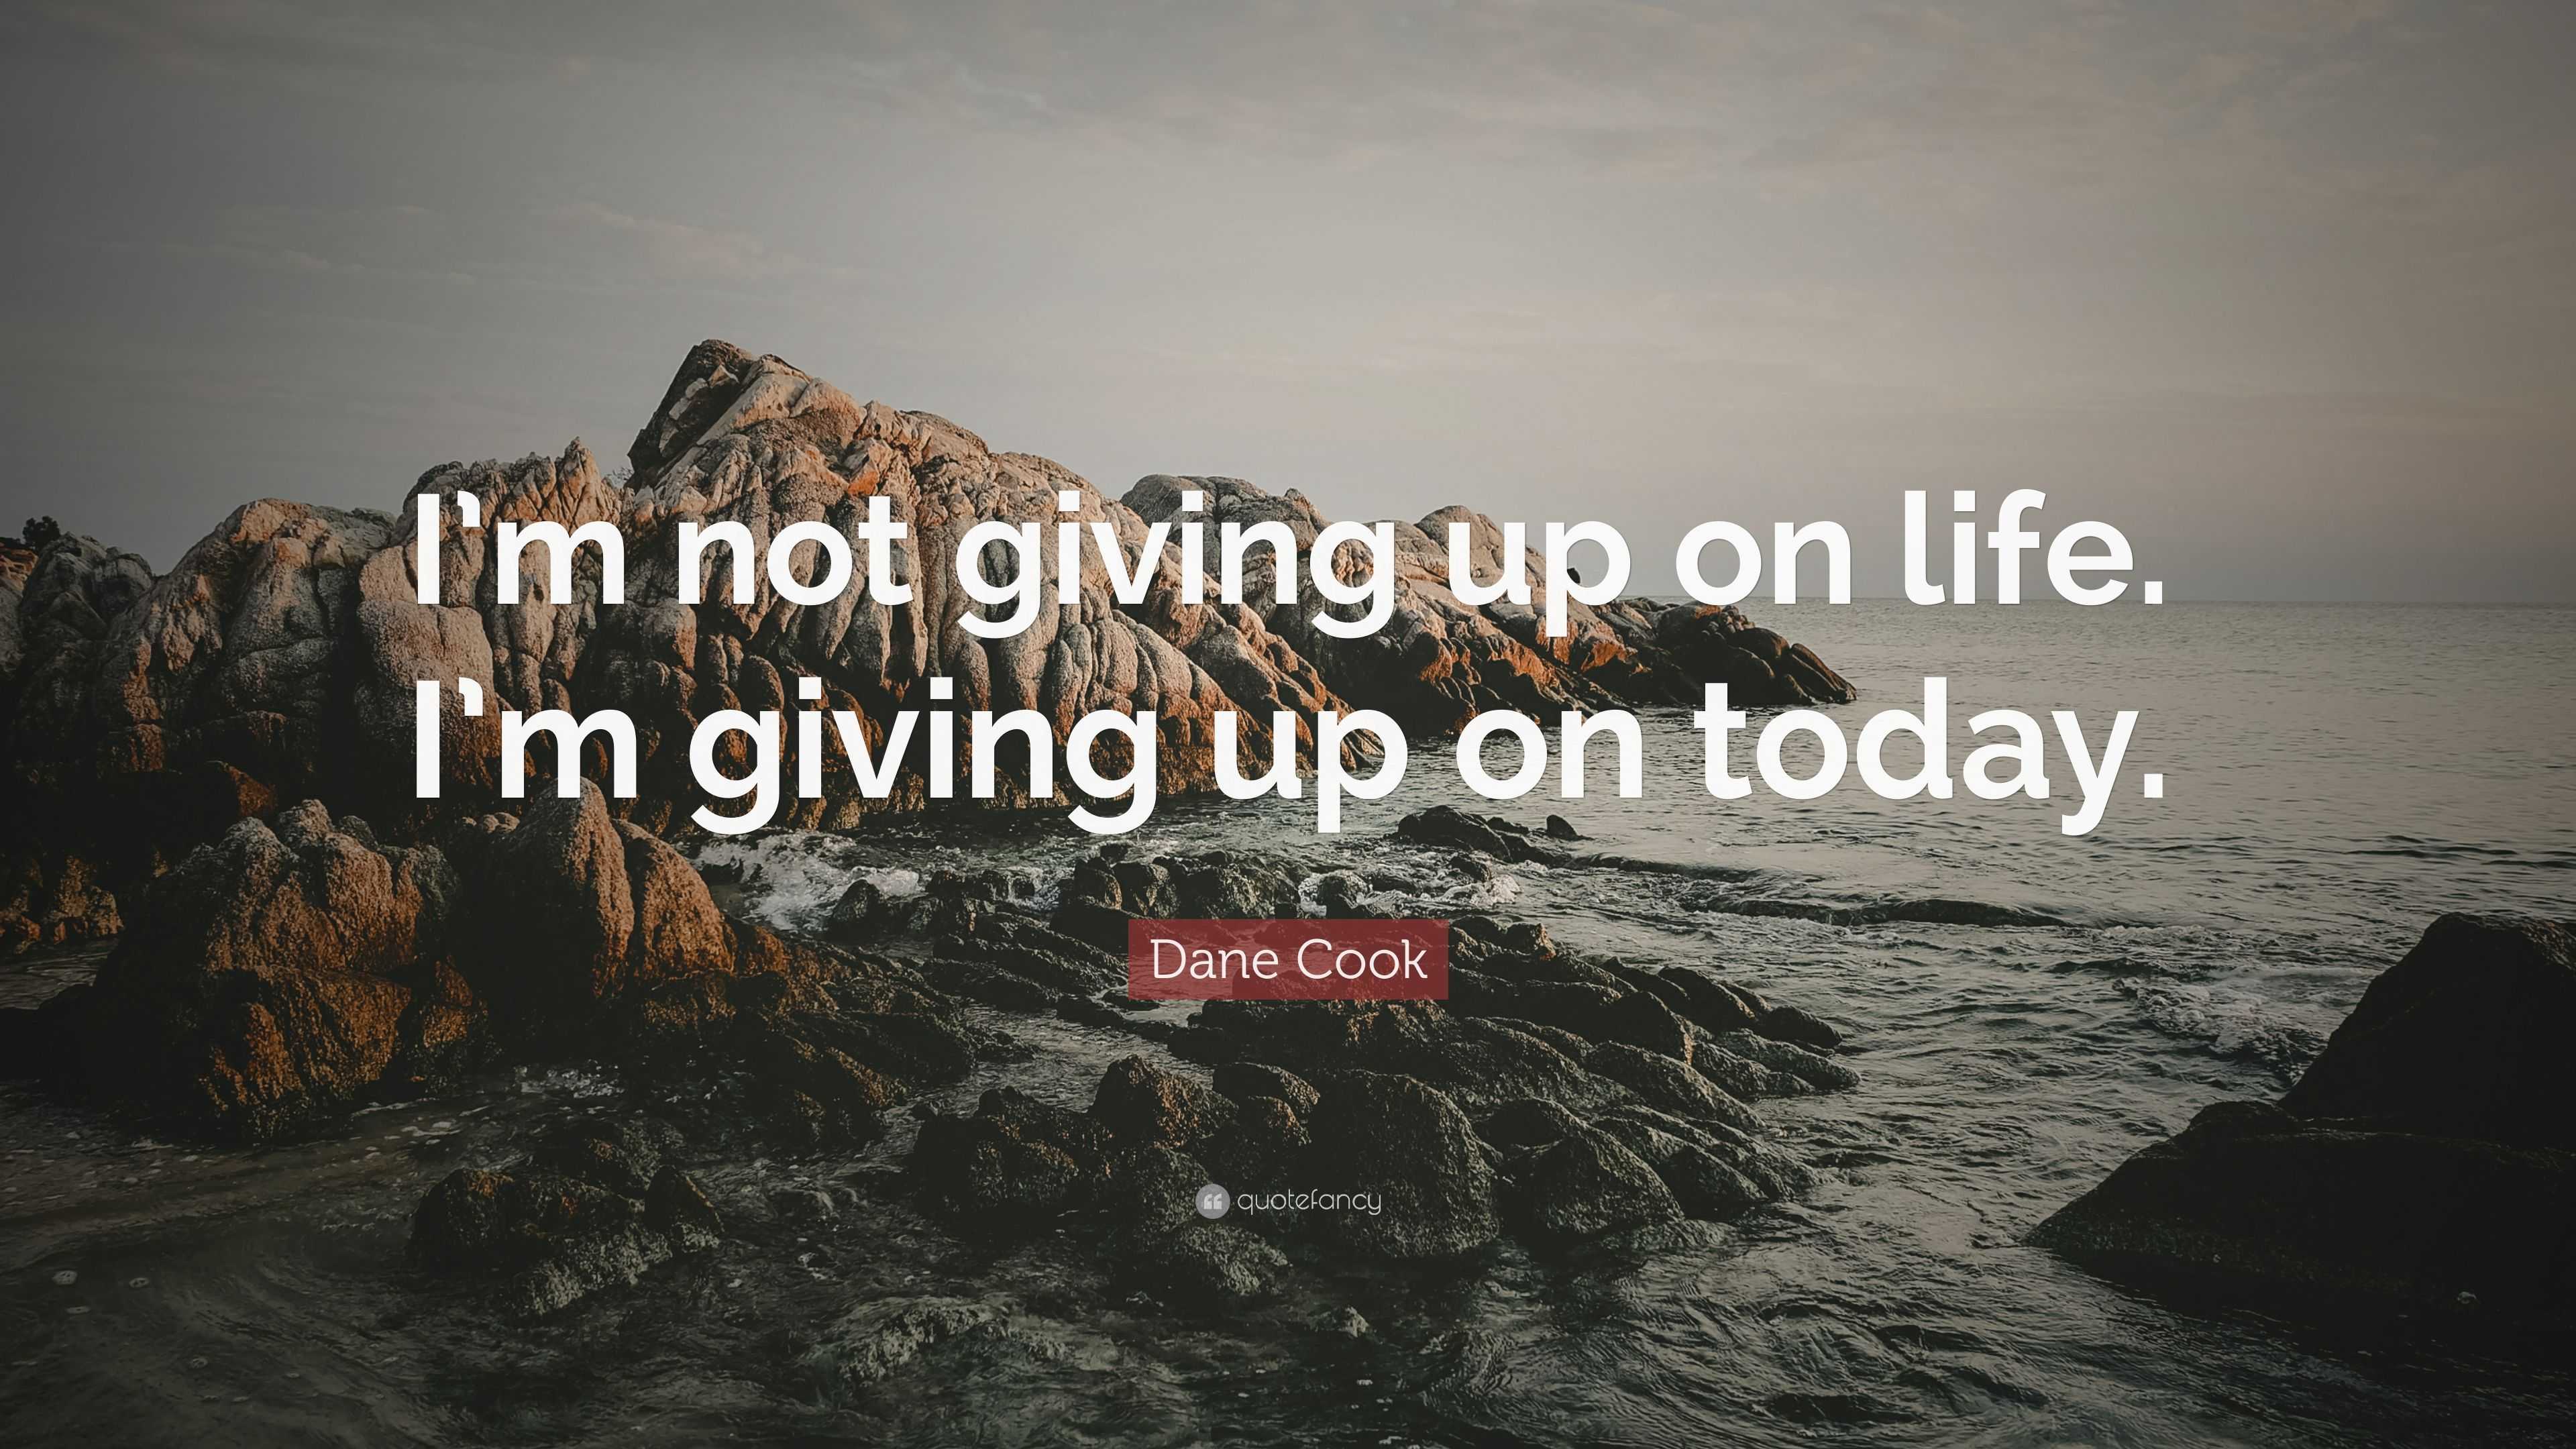 Dane Cook Quote: “I’m not giving up on life. I’m giving up on today.”